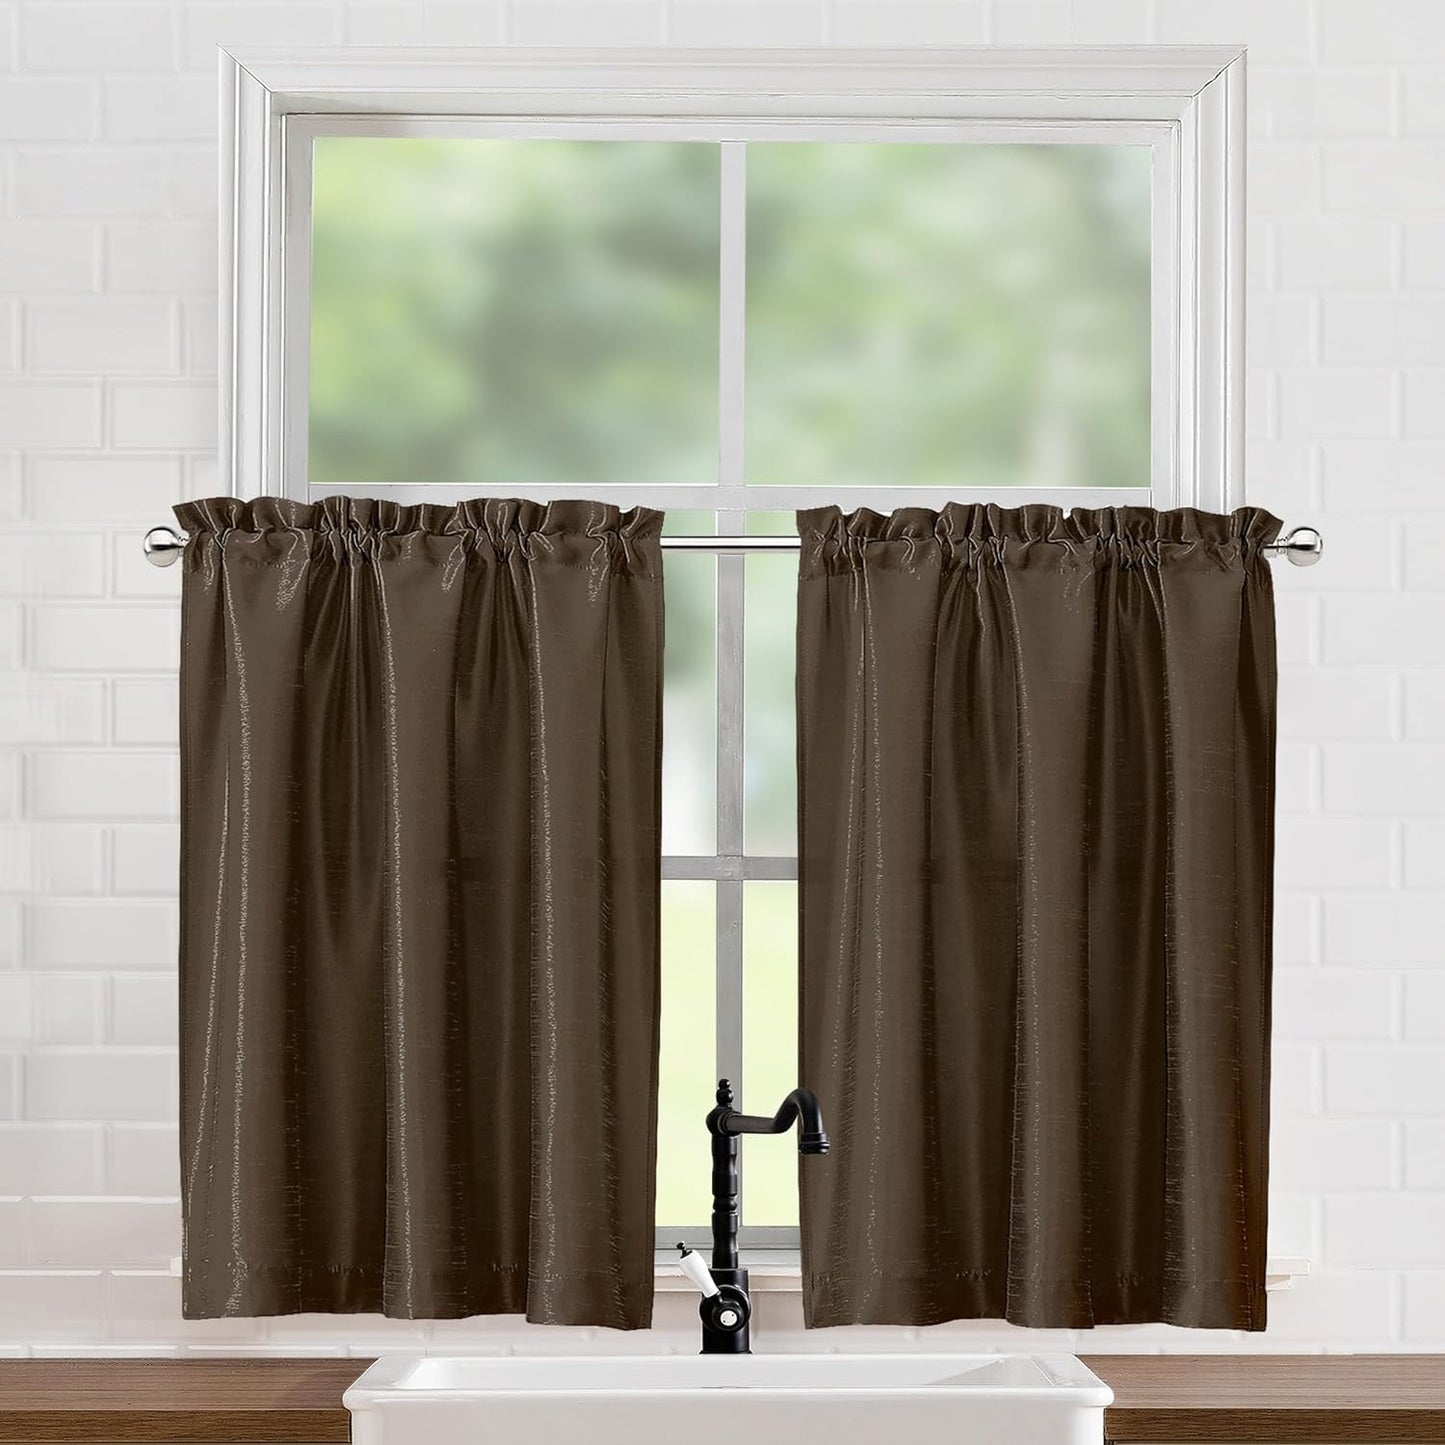 Chyhomenyc Uptown Sage Green Kitchen Curtains 45 Inch Length 2 Panels, Room Darkening Faux Silk Chic Fabric Short Window Curtains for Bedroom Living Room, Each 30Wx45L  Chyhomenyc Chocolate 2X40"Wx36"L 